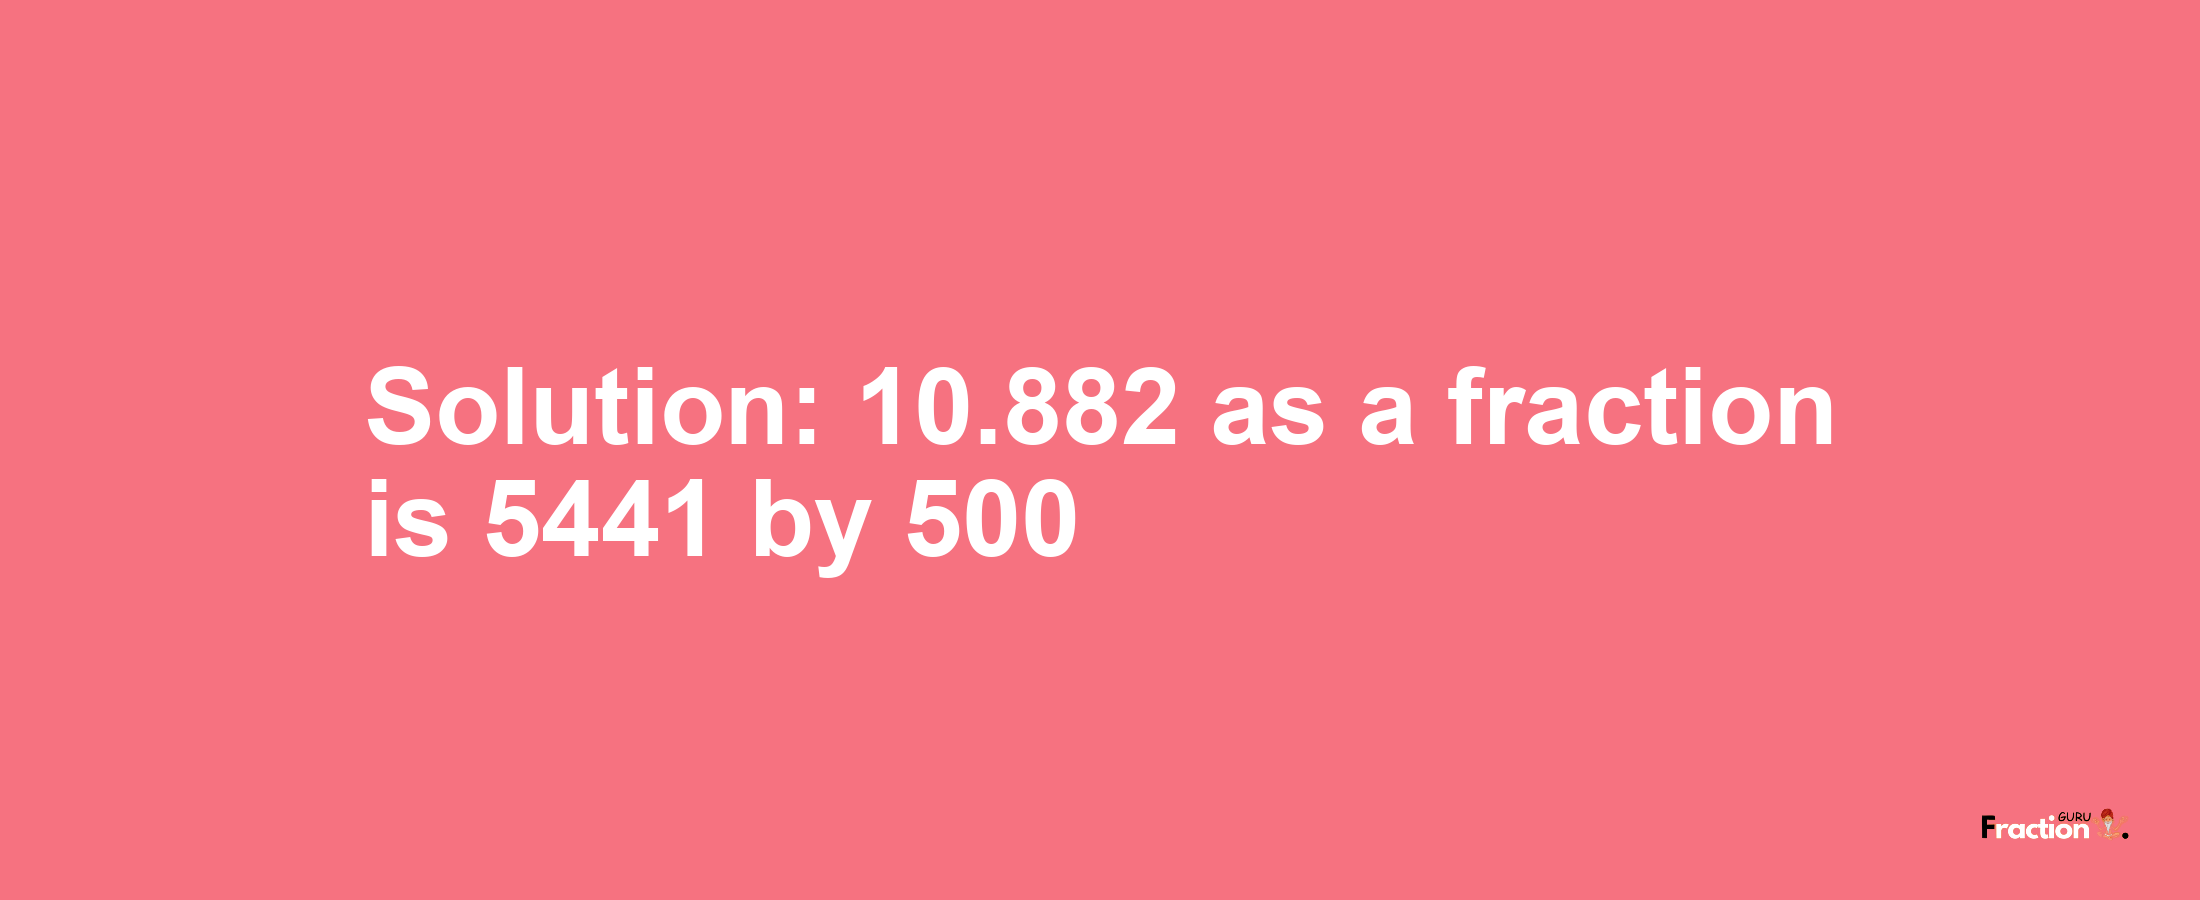 Solution:10.882 as a fraction is 5441/500